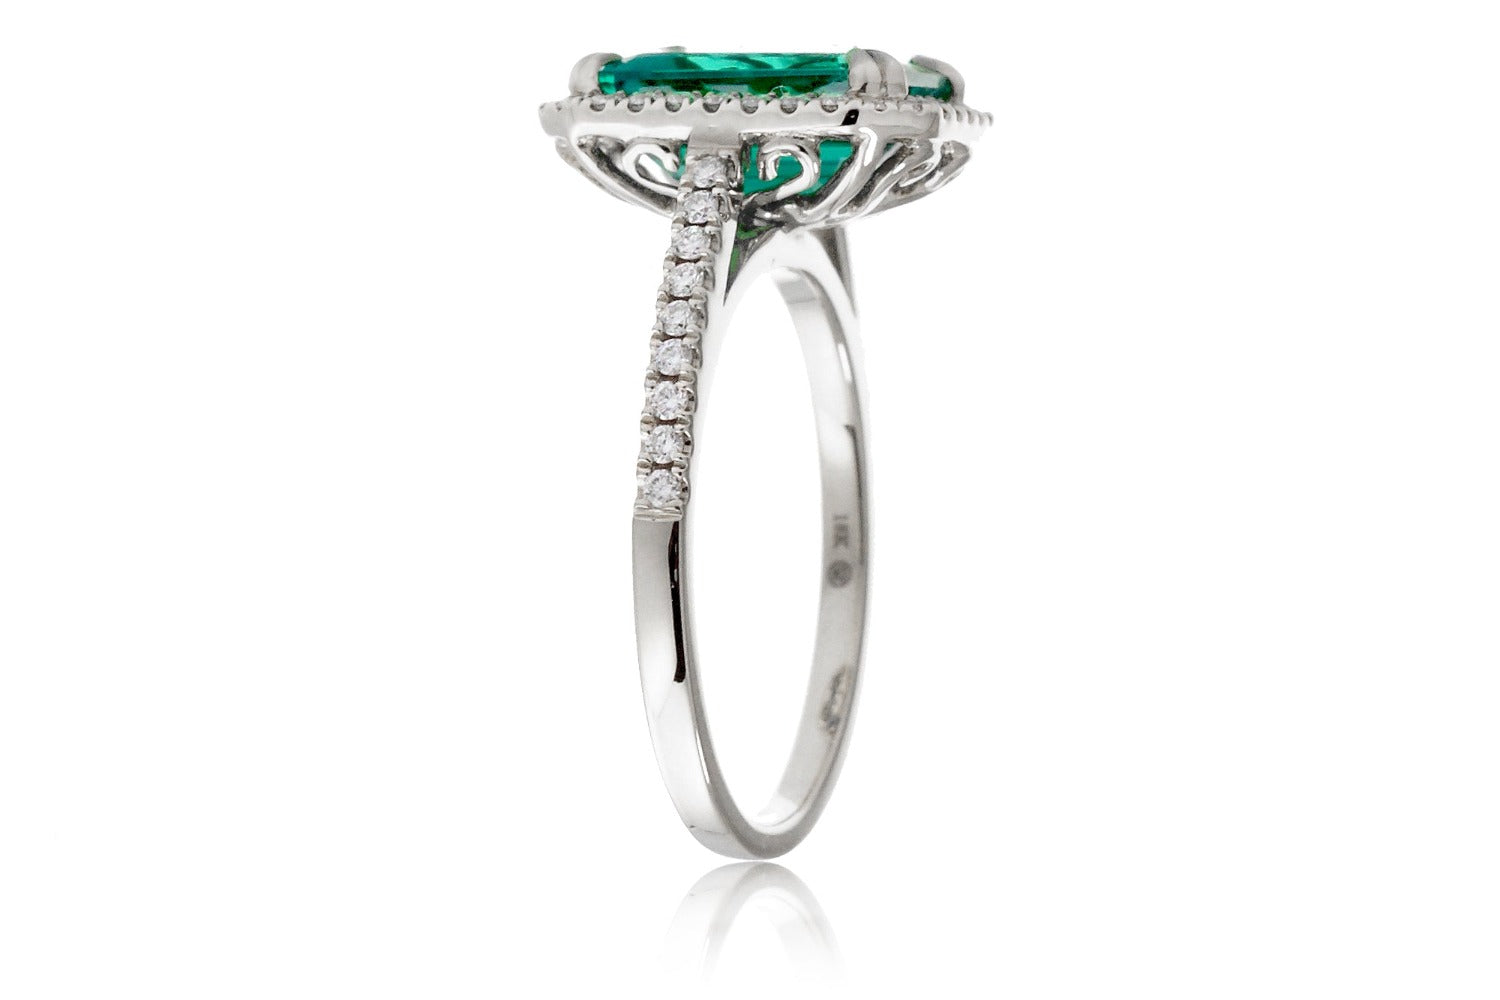 Emerald Cut Emerald With Diamond Halo Engagement Ring In White Gold or Platinum Cathedral Setting